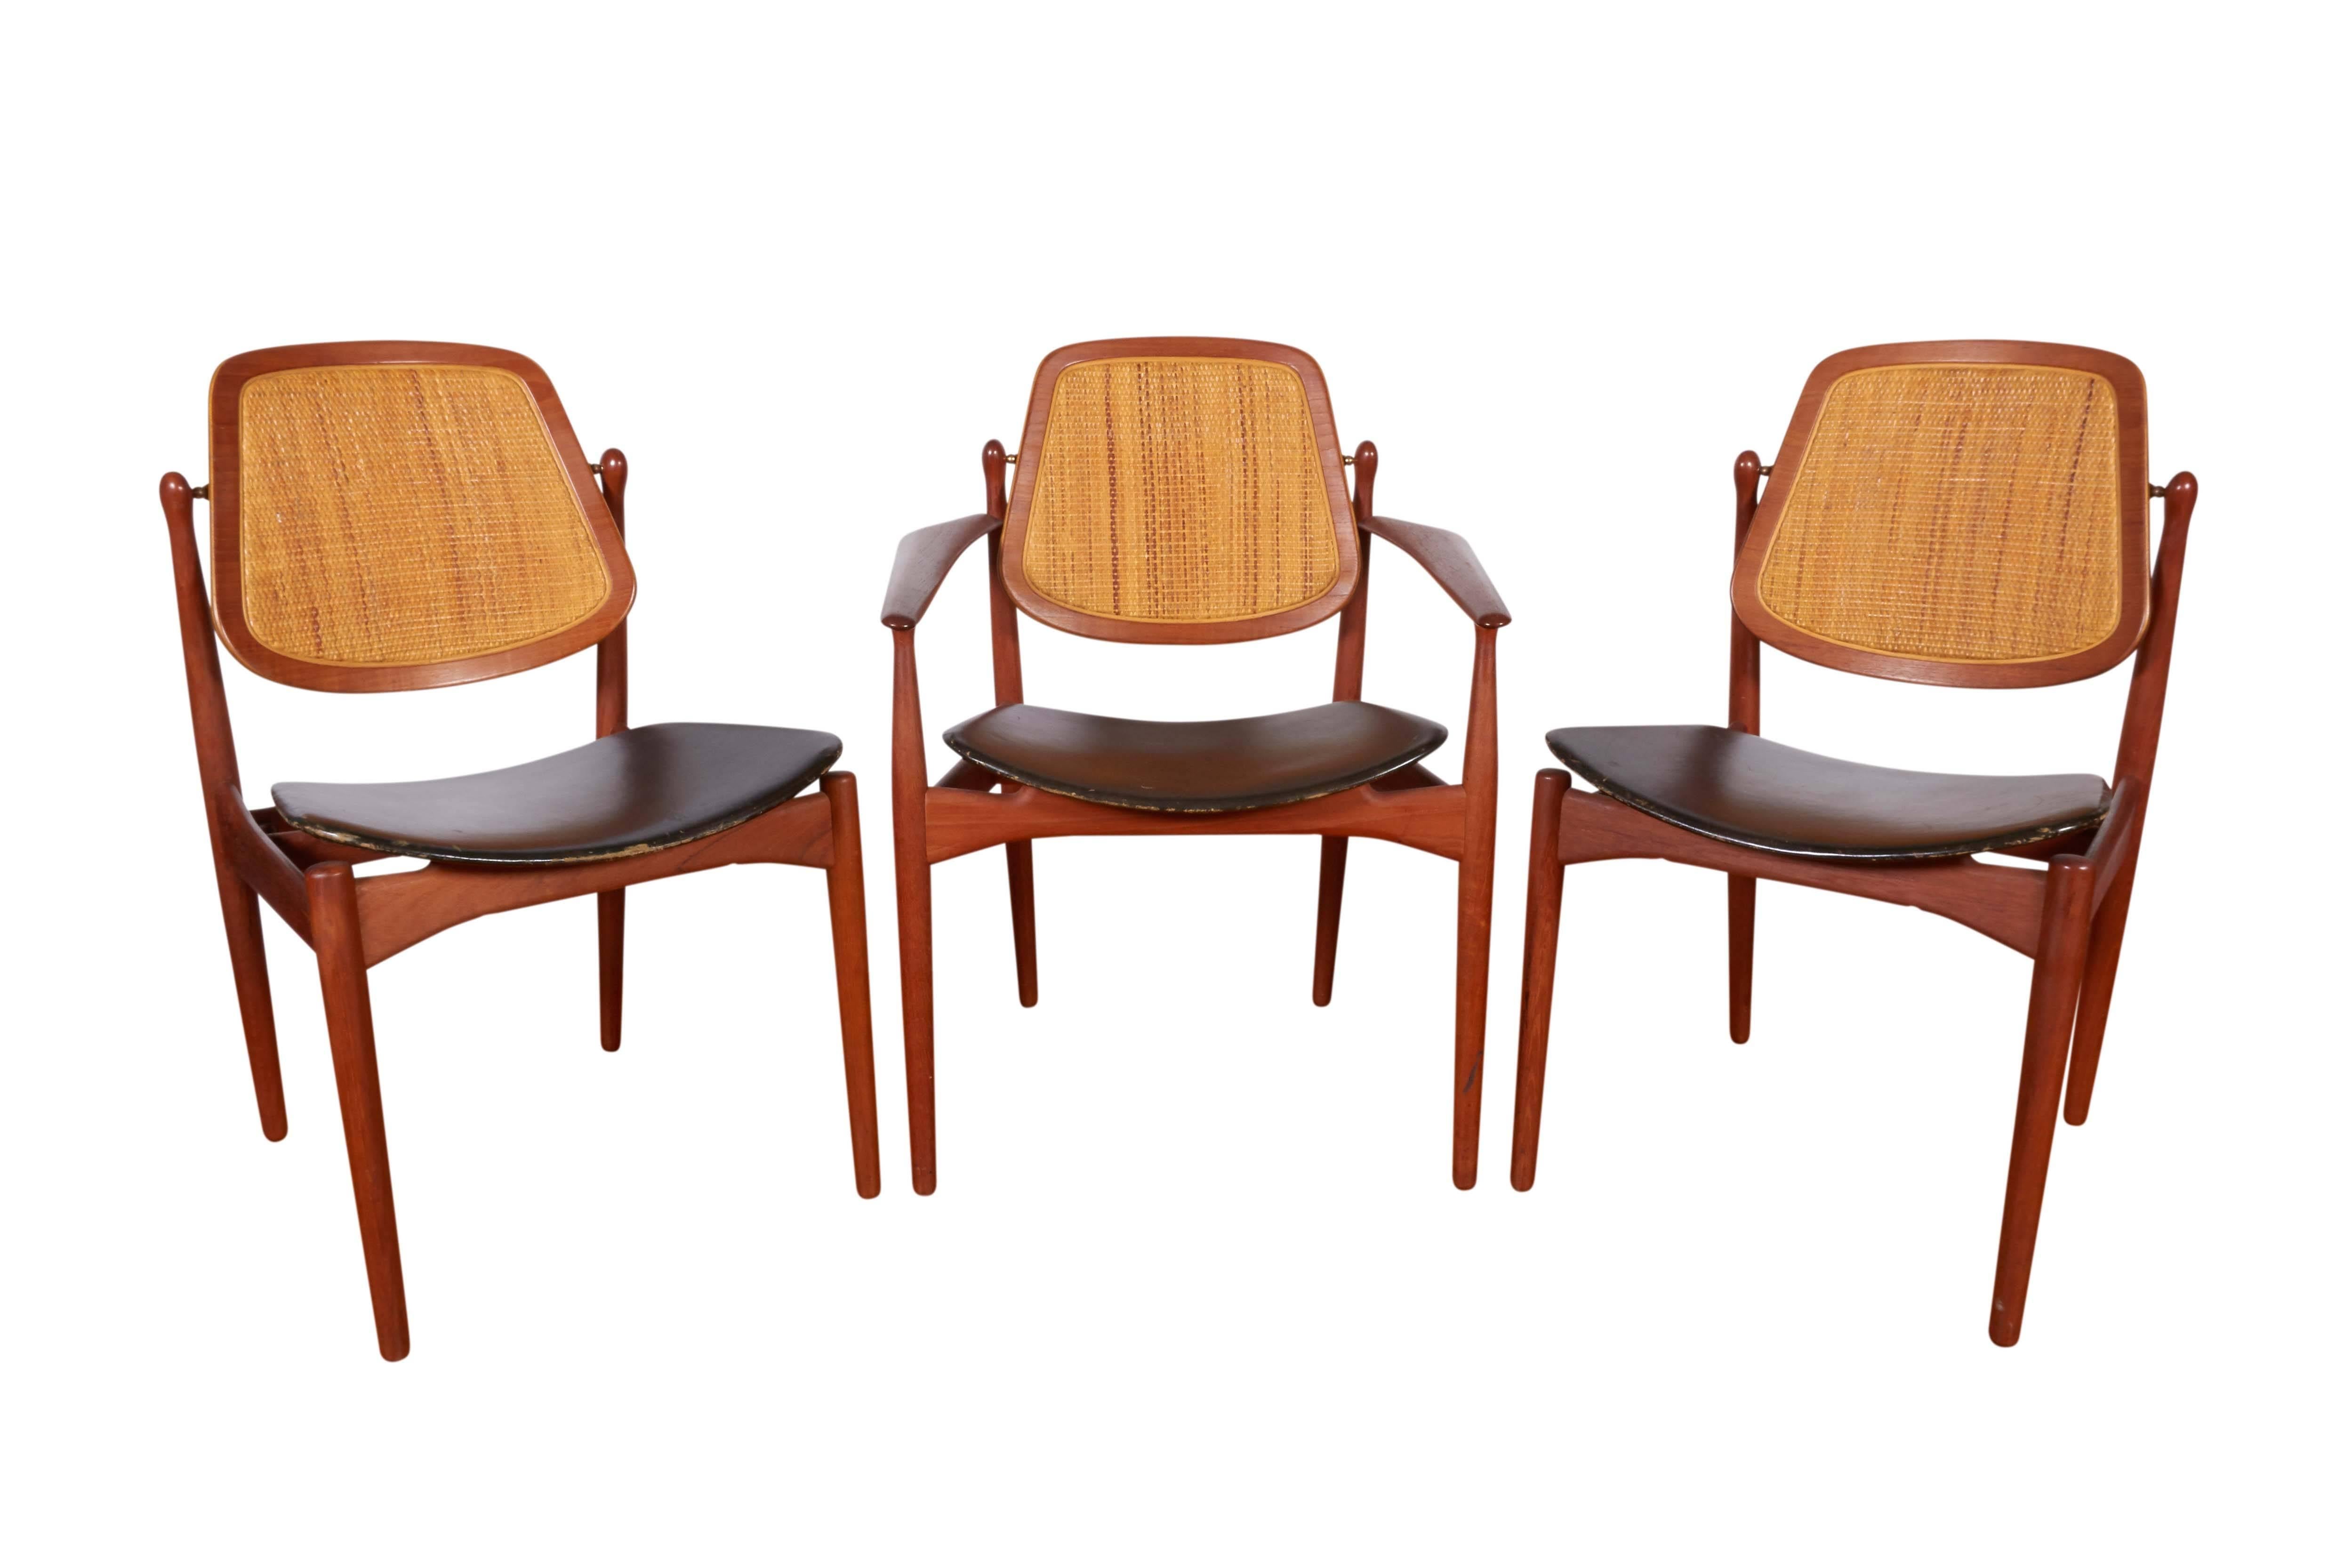 A set of six Scandinavian Modern dining chairs by Danish designer Arne Vodder, manufactured circa 1950s by France & Daverkosen (Later France & Son), comprising two armchairs and four side chairs, with pivoting cane backs and floating black leather